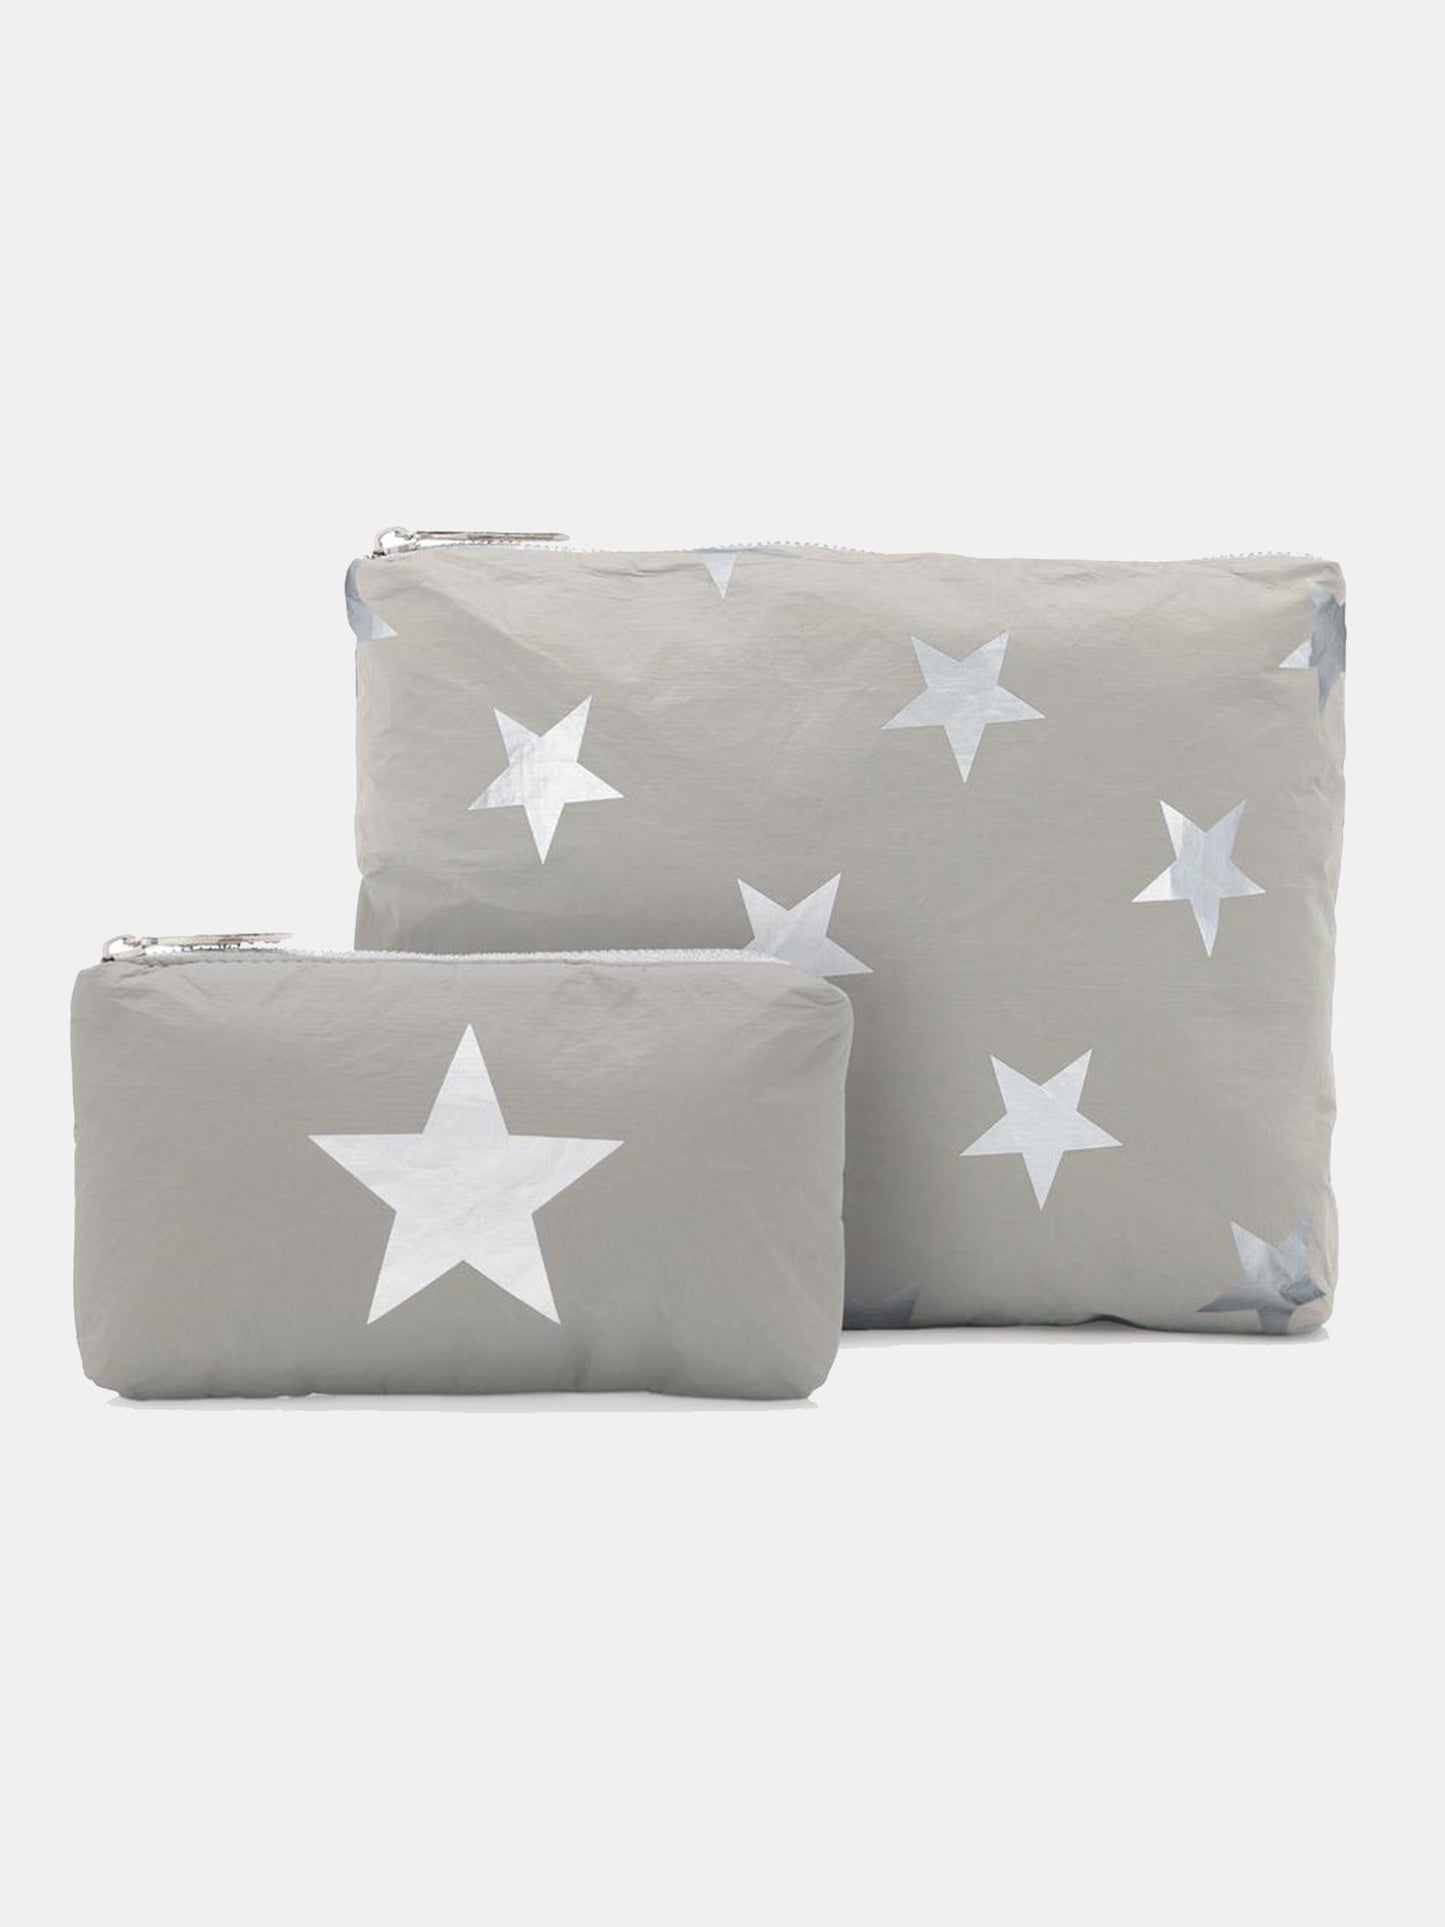 HiLoveTravel Two Piece Set Gray With Myriad Silver Stars Packs